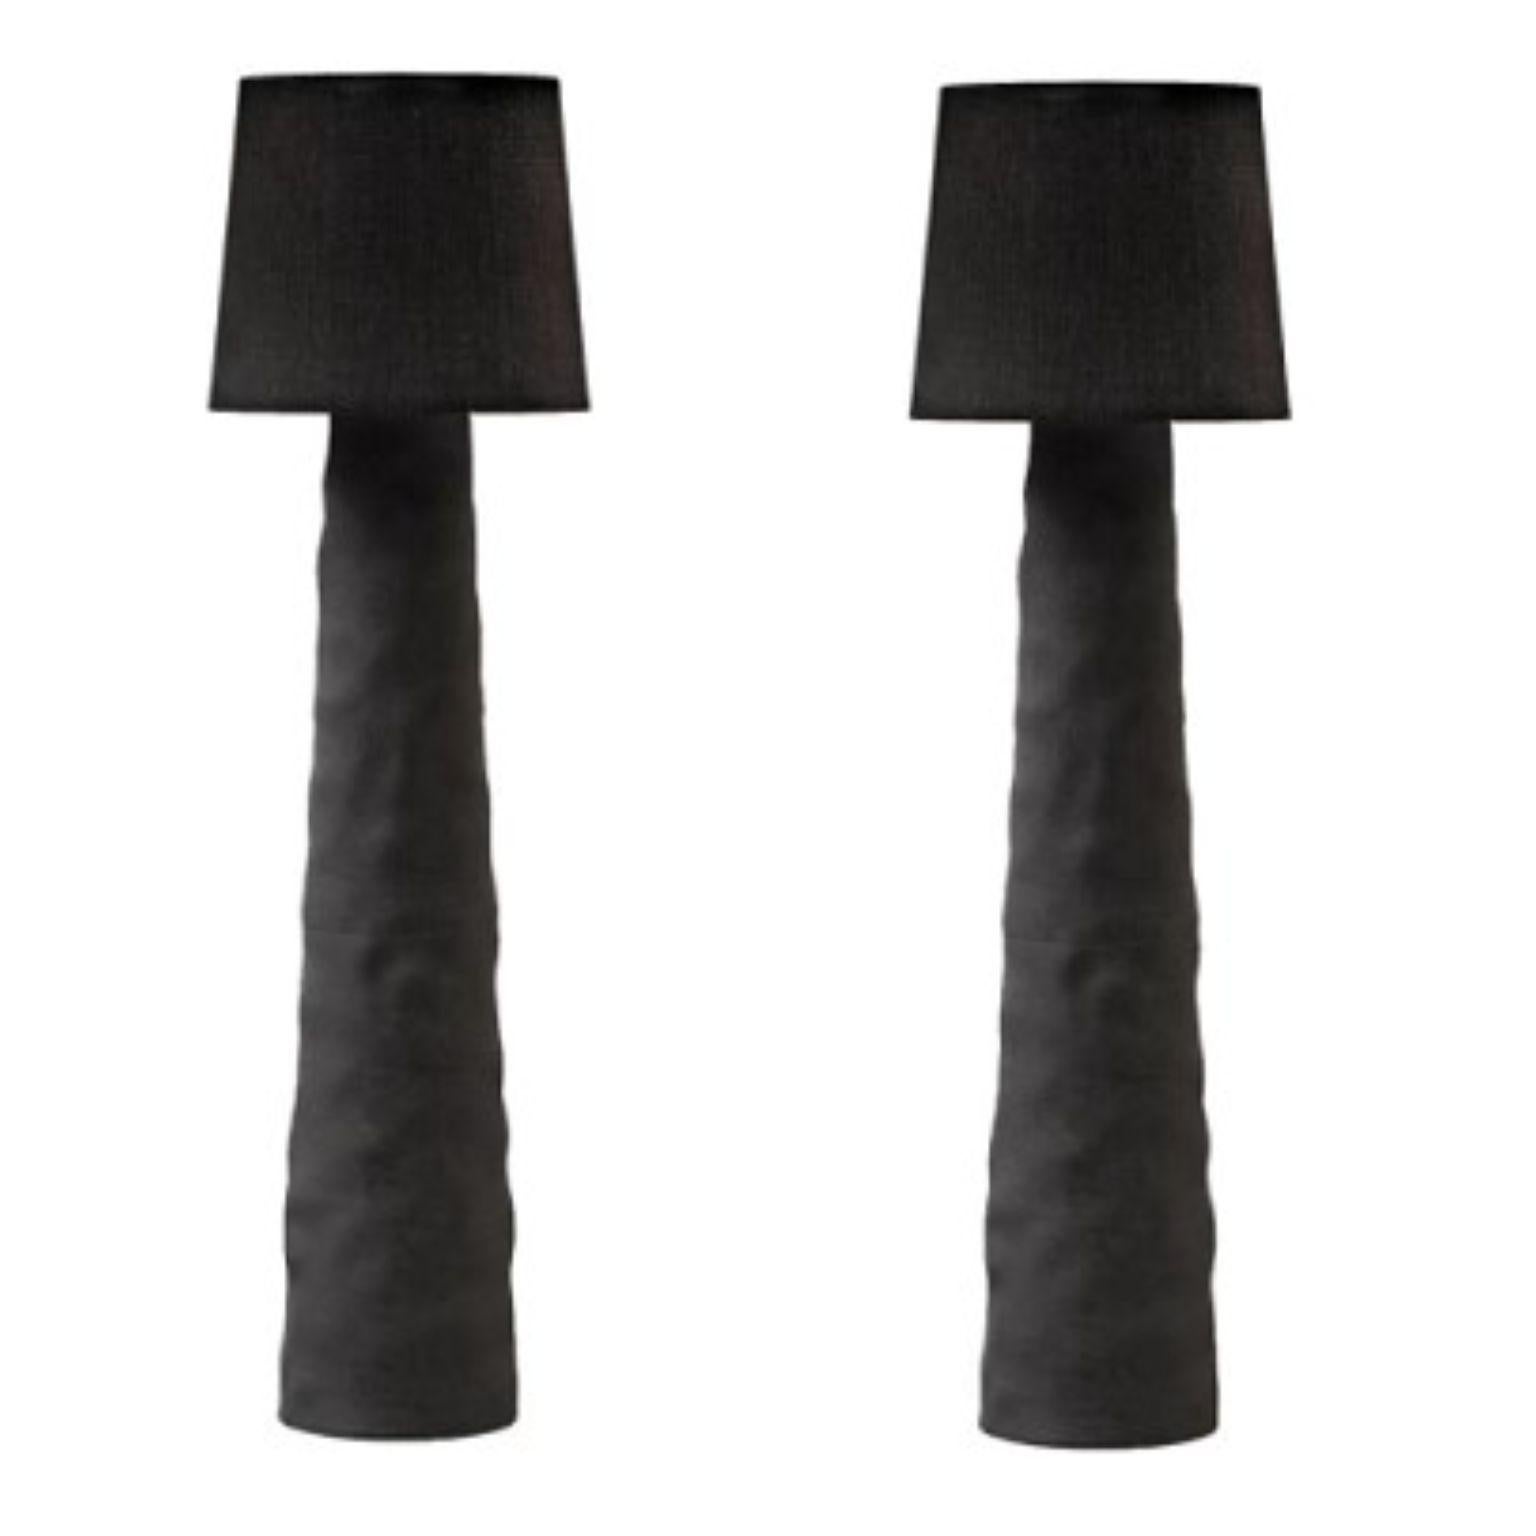 Set of 2 Sculpted Clay Floor Lamps by Faina
Design: Victoriya Yakusha
Material: clay, wood (ash)
Dimensions: 170 x 50 x 50 cm
Weight: 63 kilos.

*All our lamps can be wired according to each country. If sold to the USA it will be wired for the USA